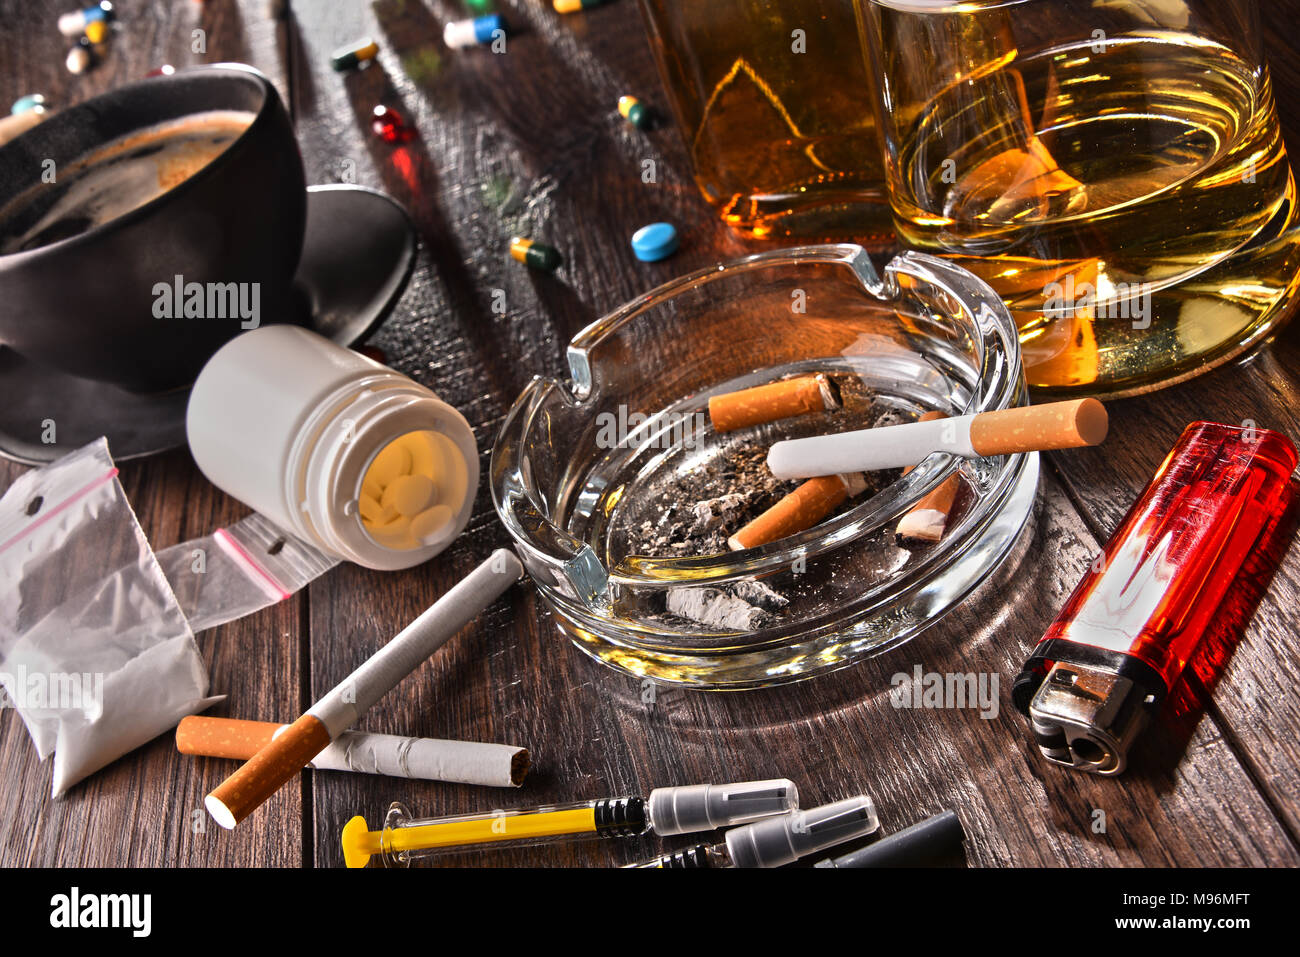 addictive-substances-including-alcohol-cigarettes-and-drugs-stock